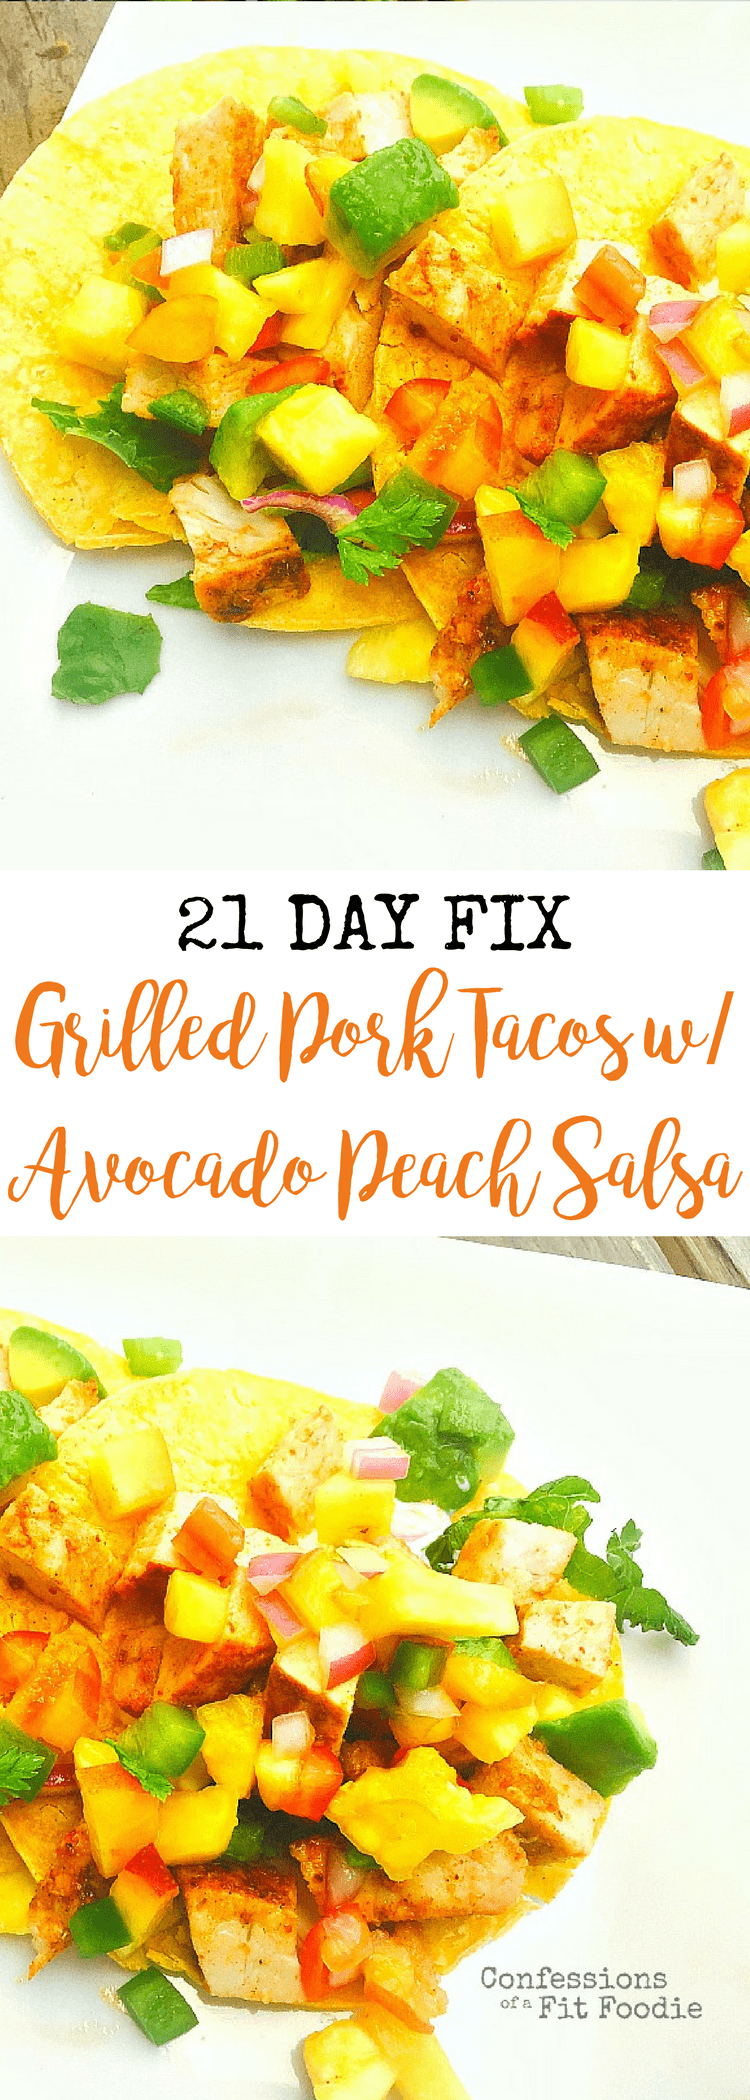 21 Day Fix Grilled Pork Tacos with Avocado Peach Salsa | Confessions of a Fit Foodie